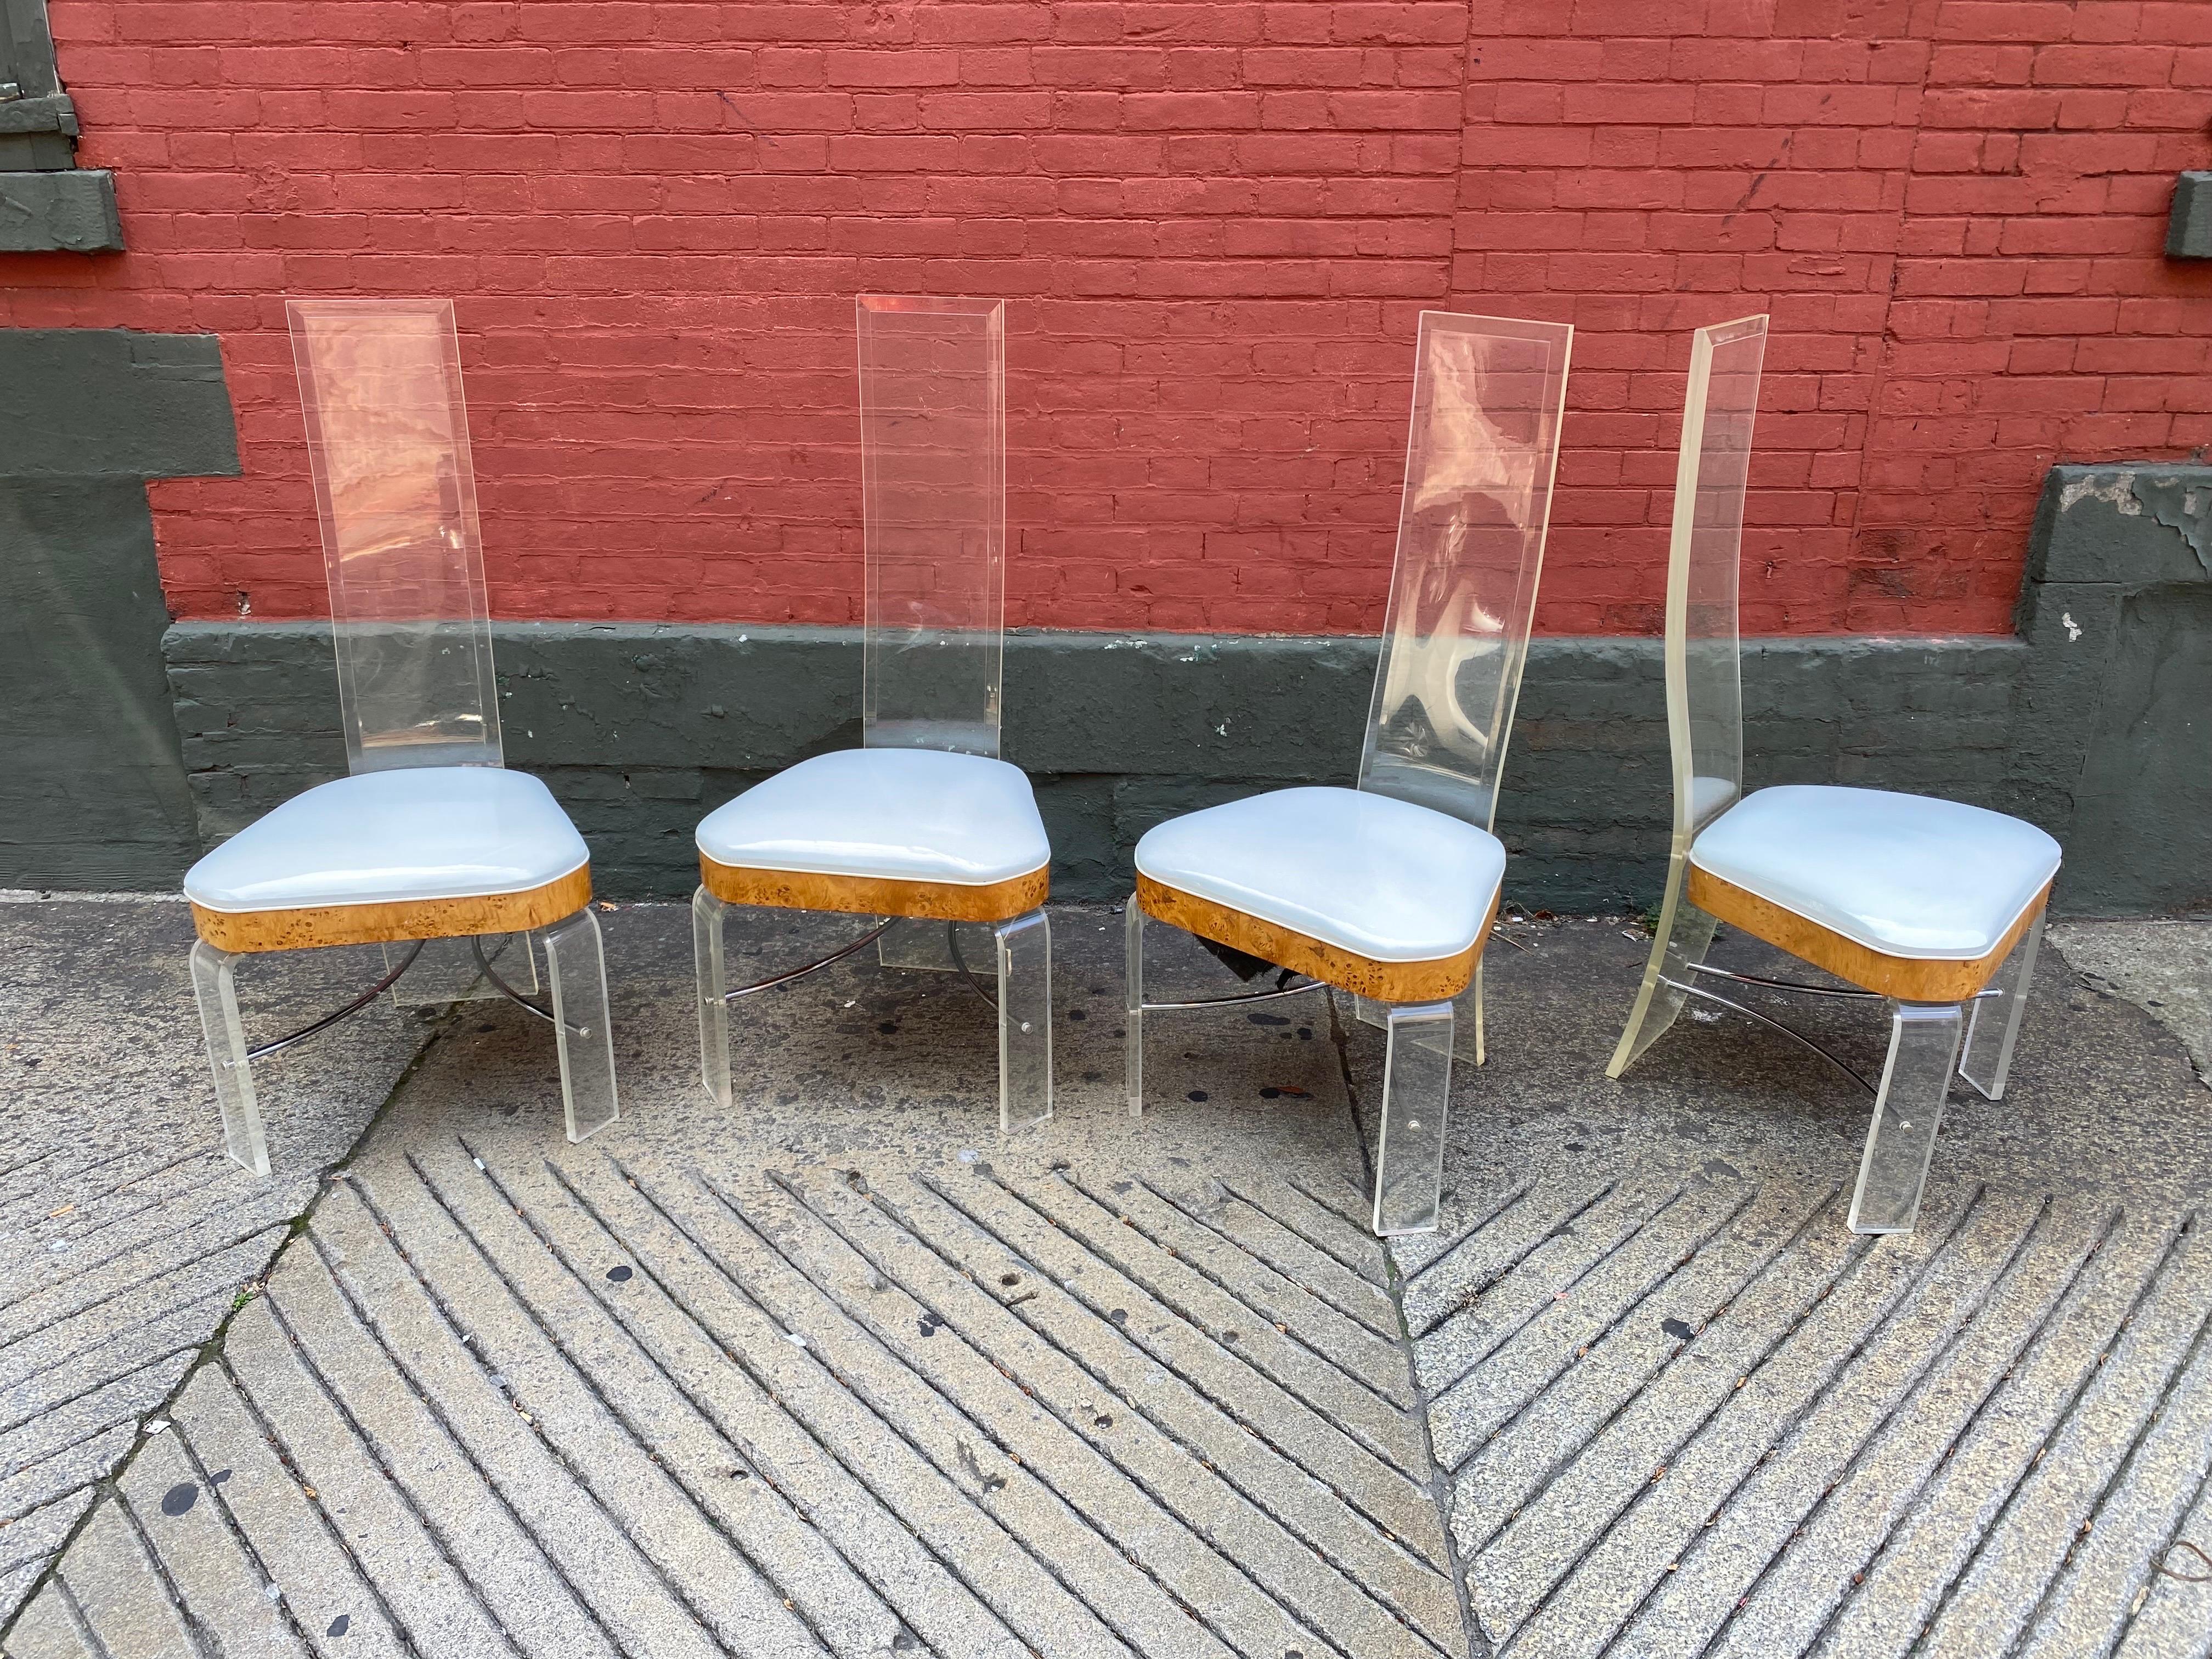 Set of 4 Hill Manufacturing Tall Back Lucite Dining Chairs.  Chairs have a burl wood band around seat cushion.  Original Patent Leather White Seats are very clean!  Chairs are sturdy and very clean examples!  Dramatic Chairs that would add a lot to